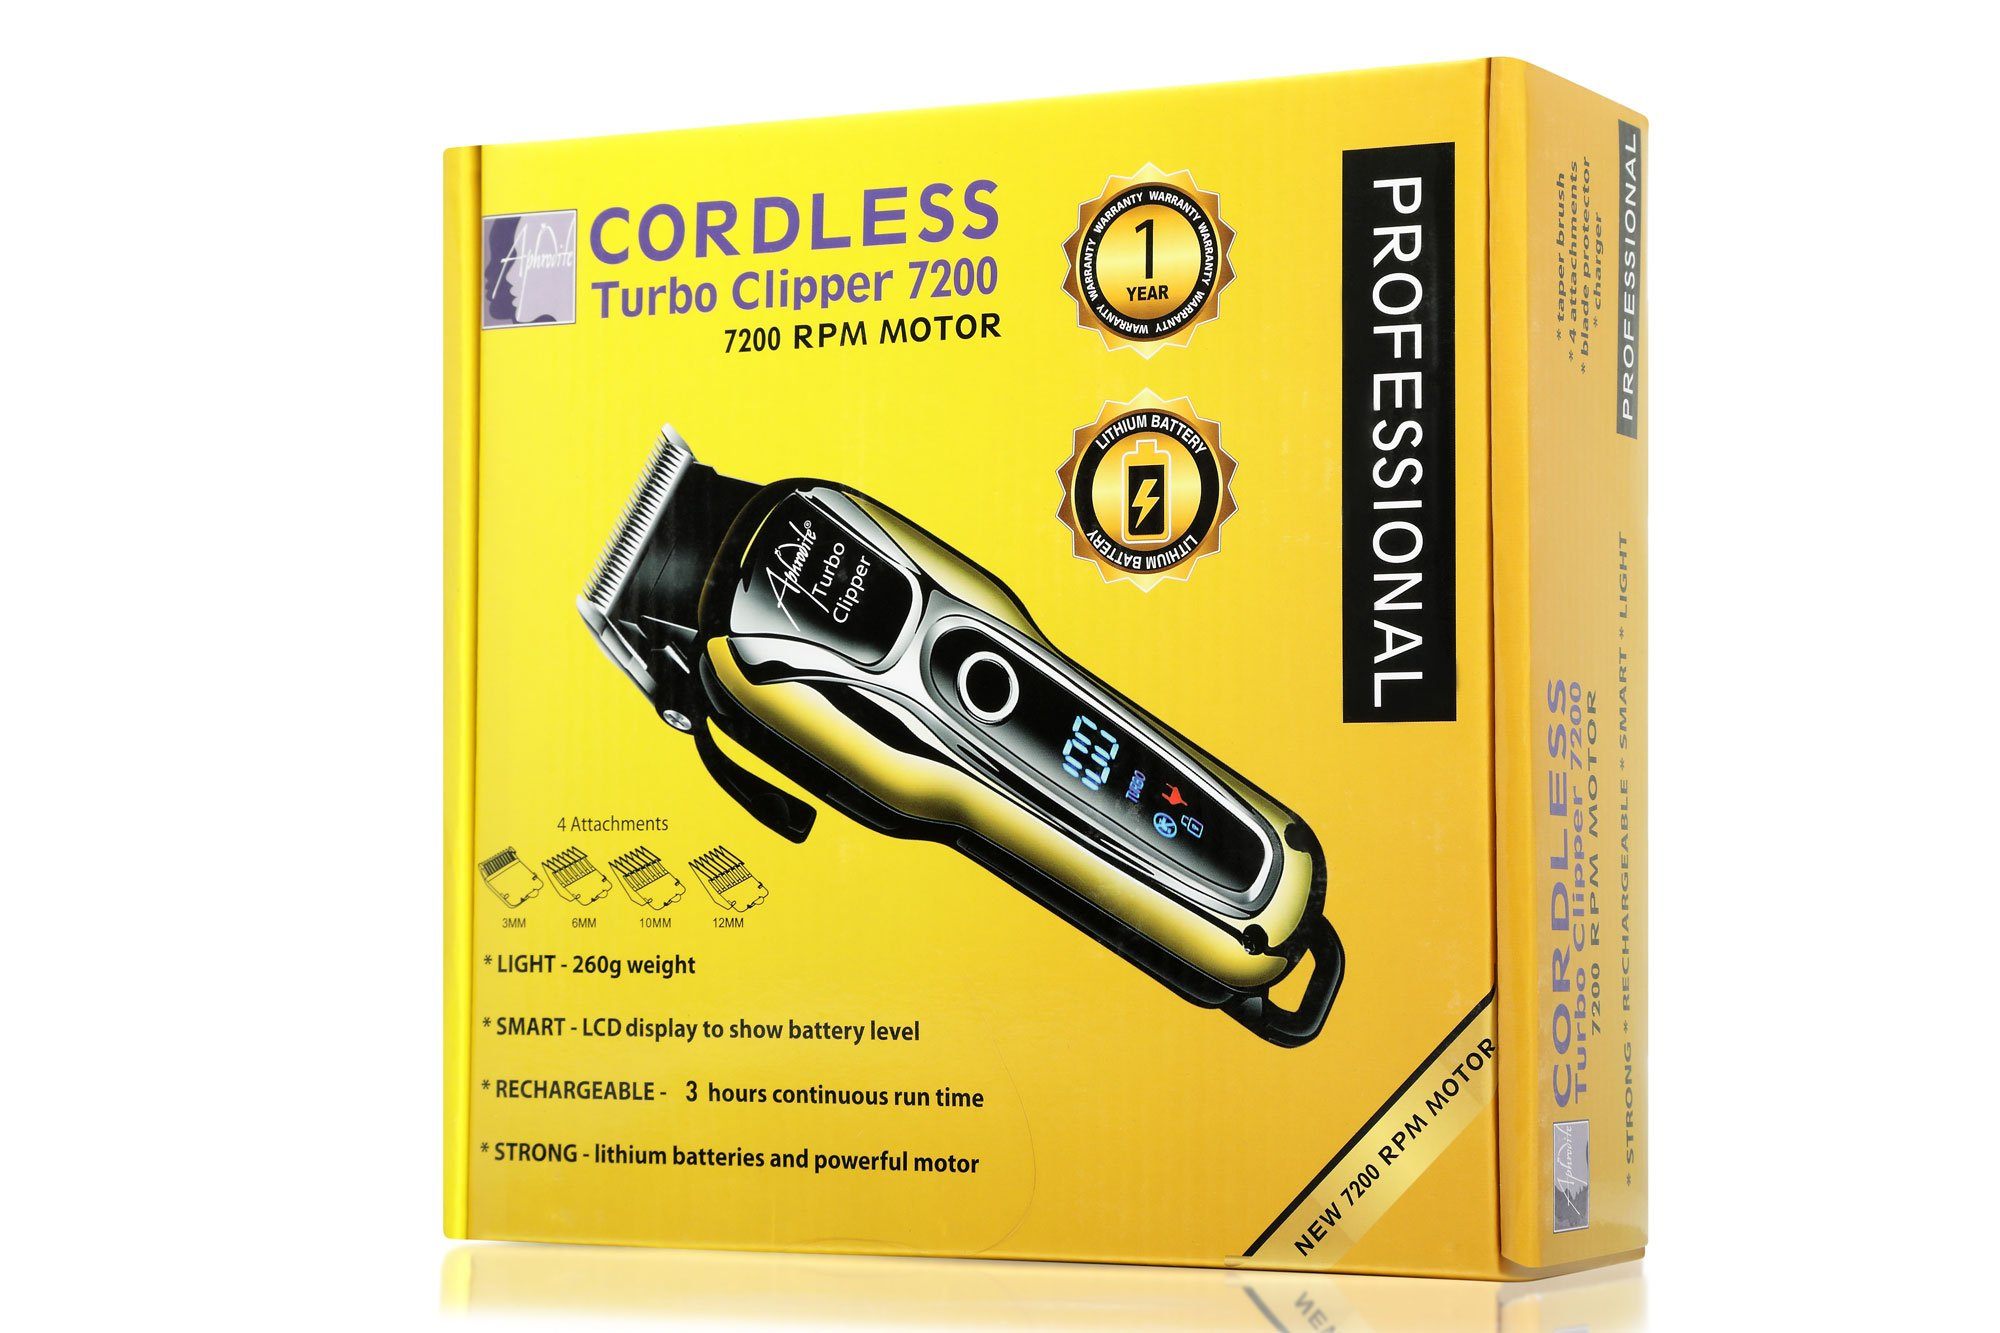 Cordless Turbo Clipper - Powerful 7200 RPM Motor - Beauty Hair Products Ltd Electricals